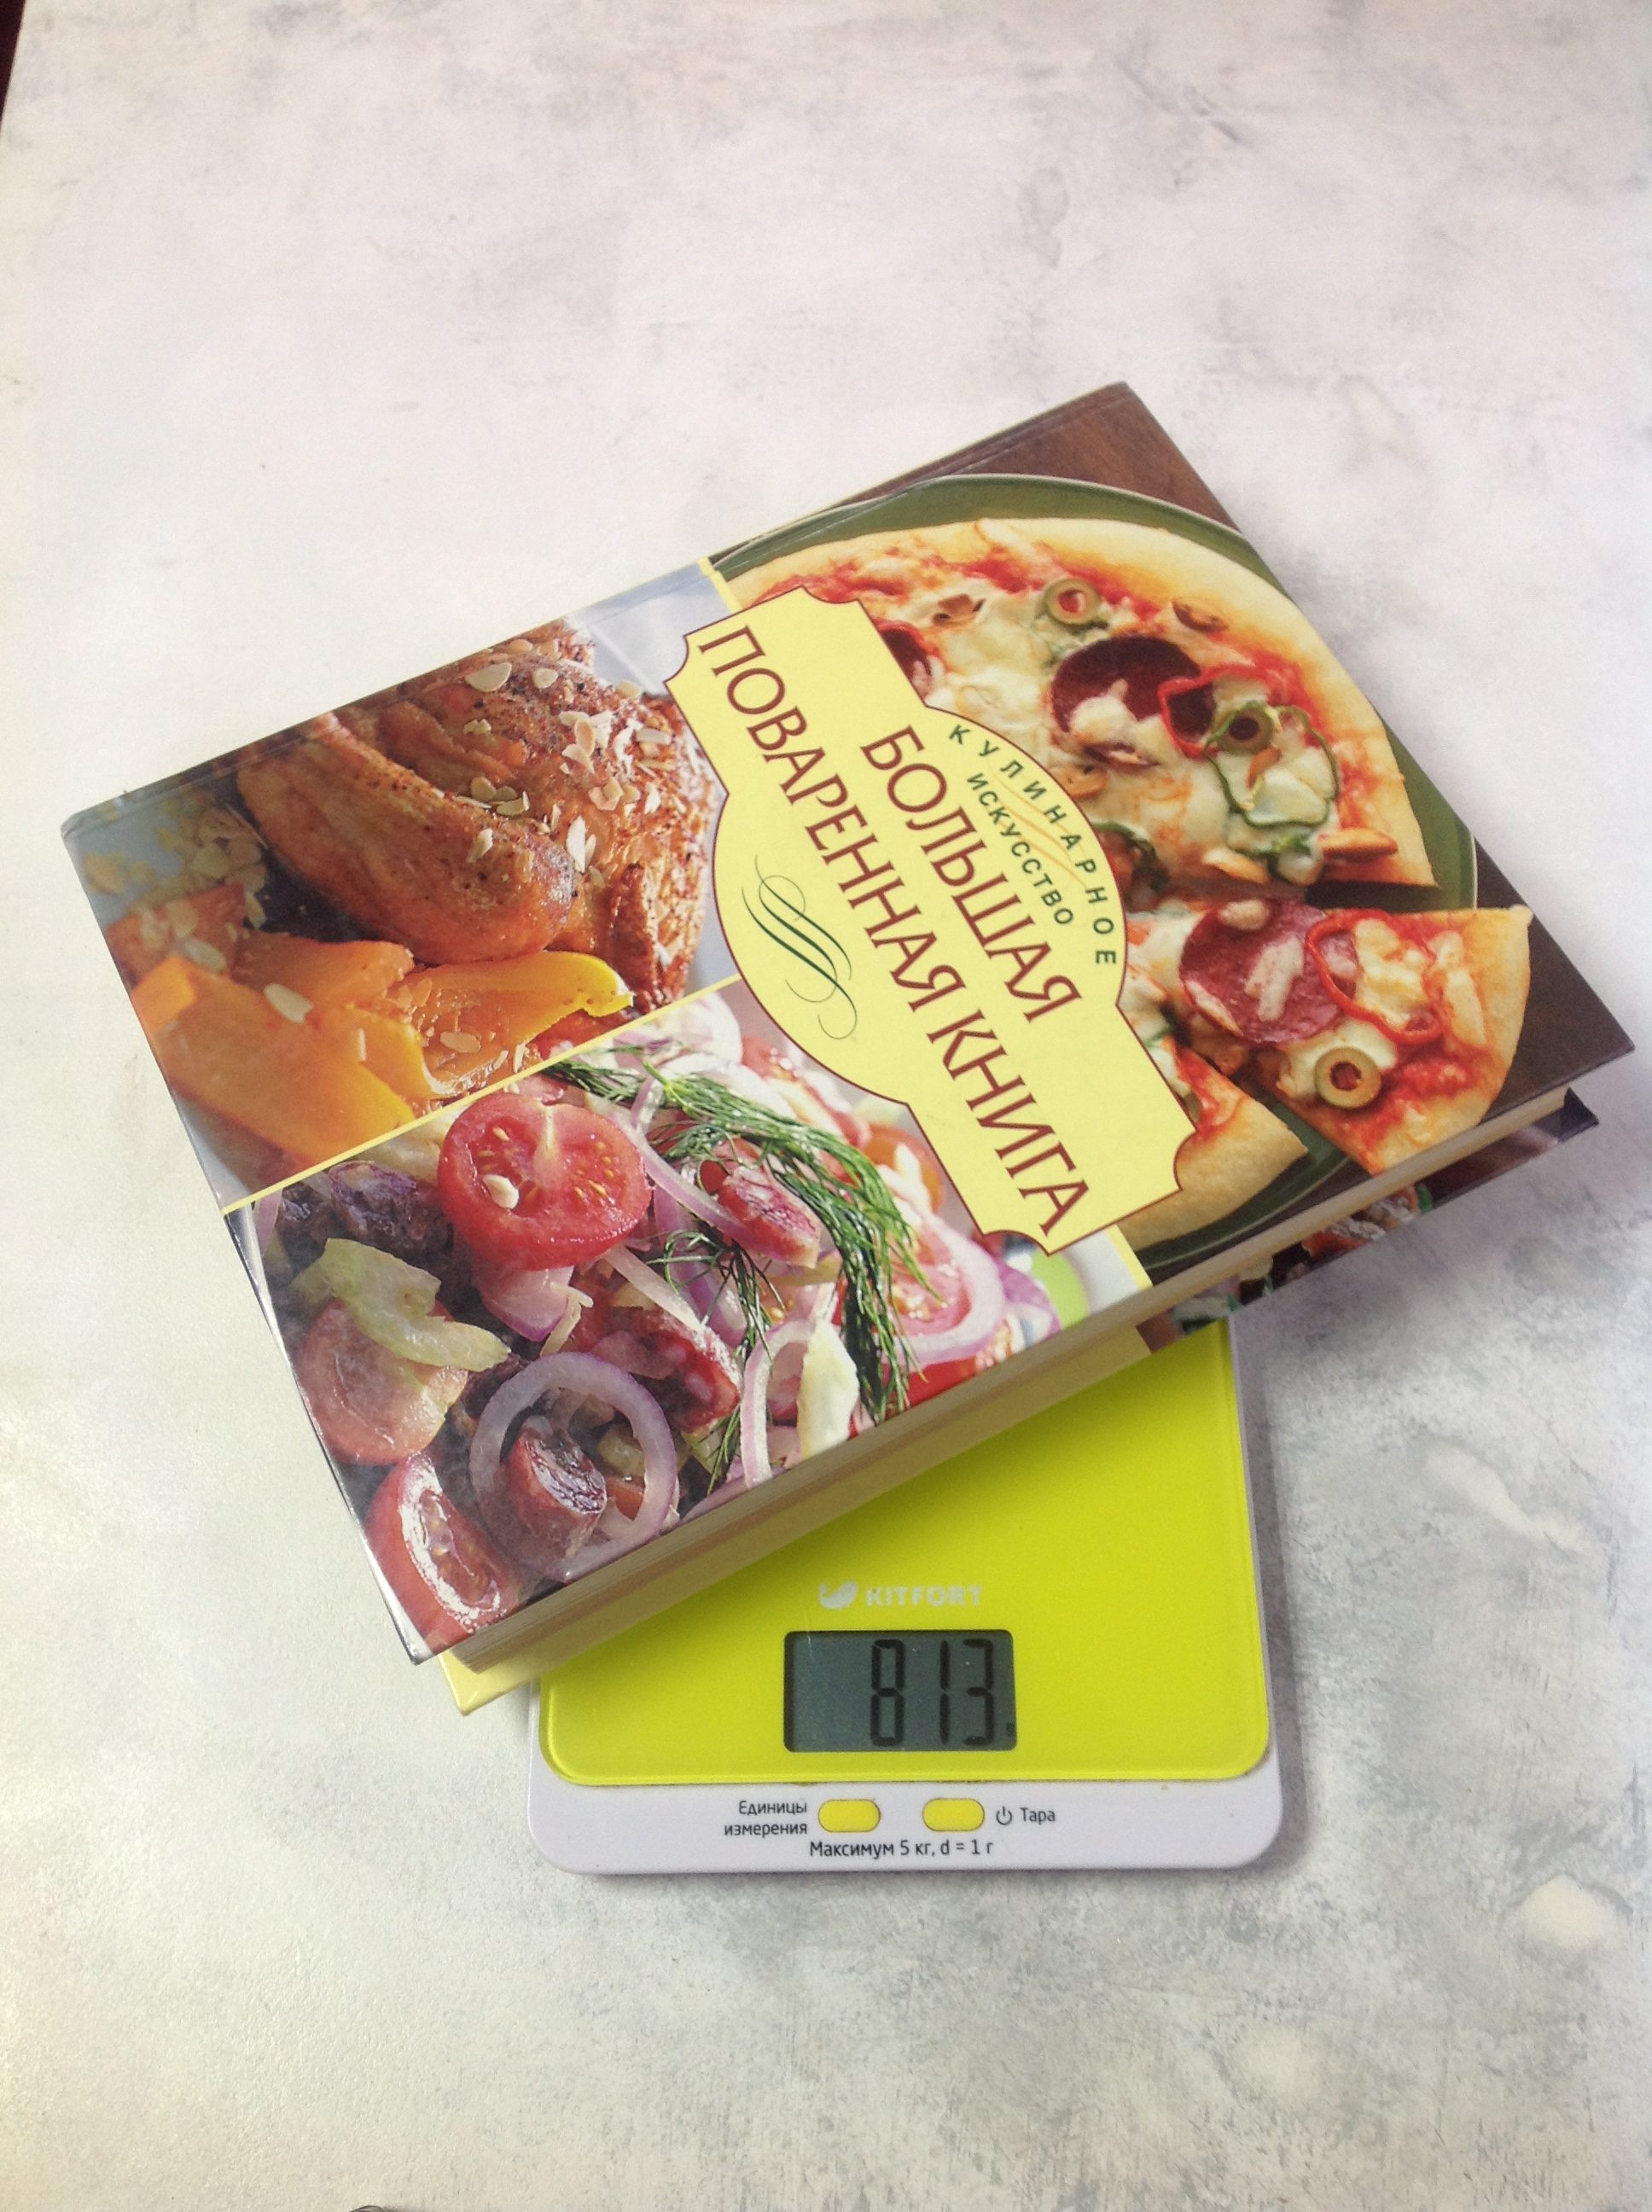 How much does a large cookbook weigh?